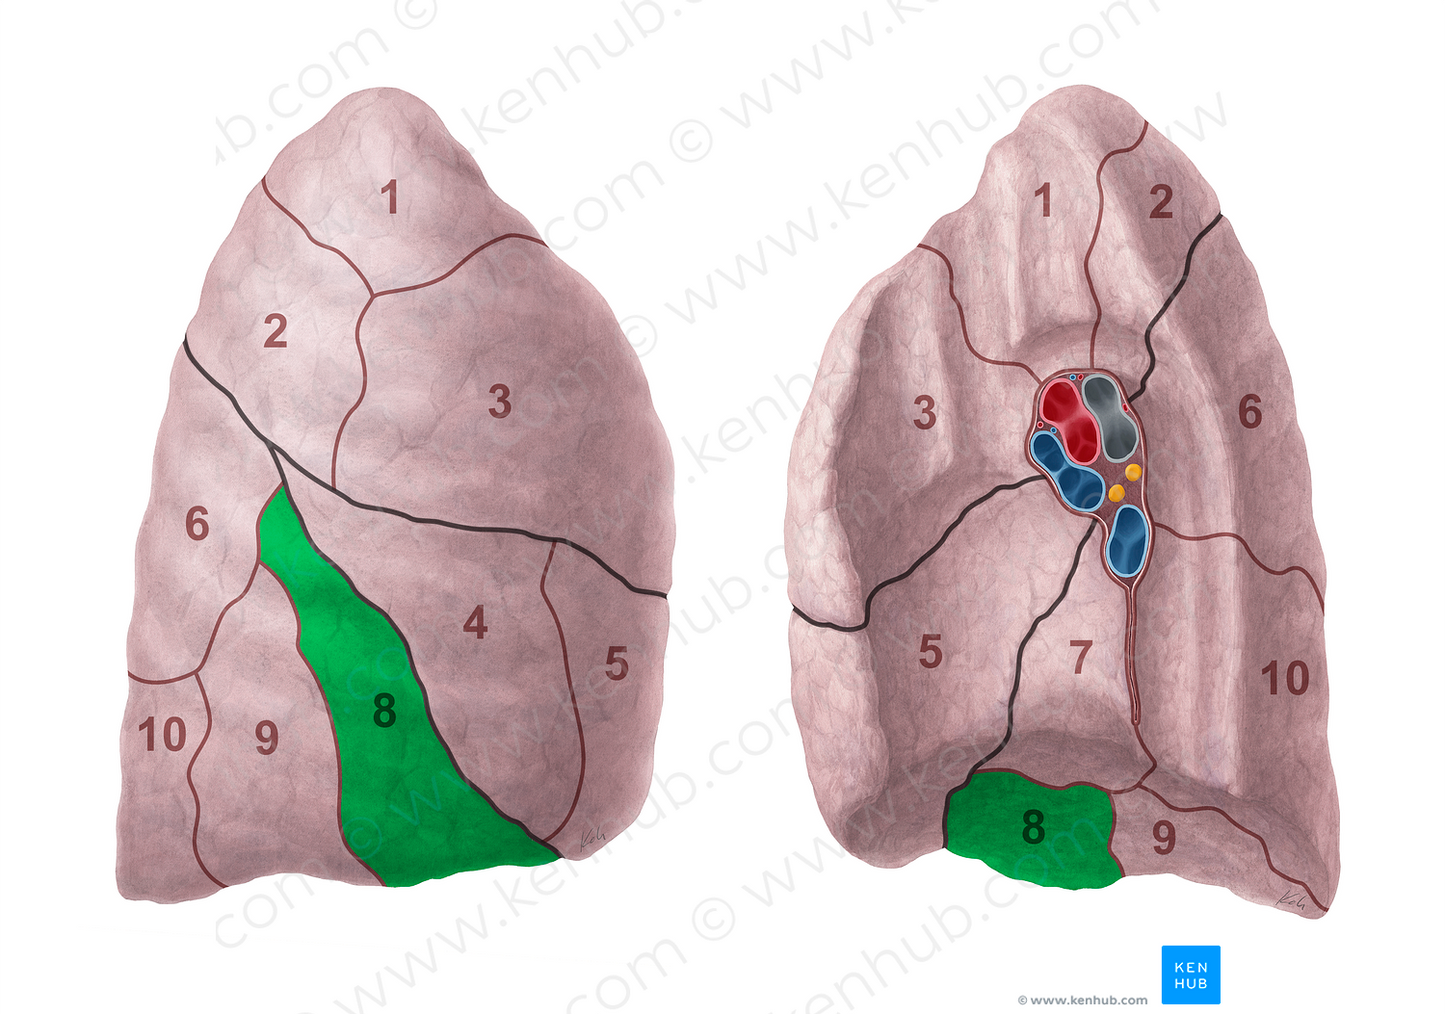 Anterior basal segment of right lung (#20695)